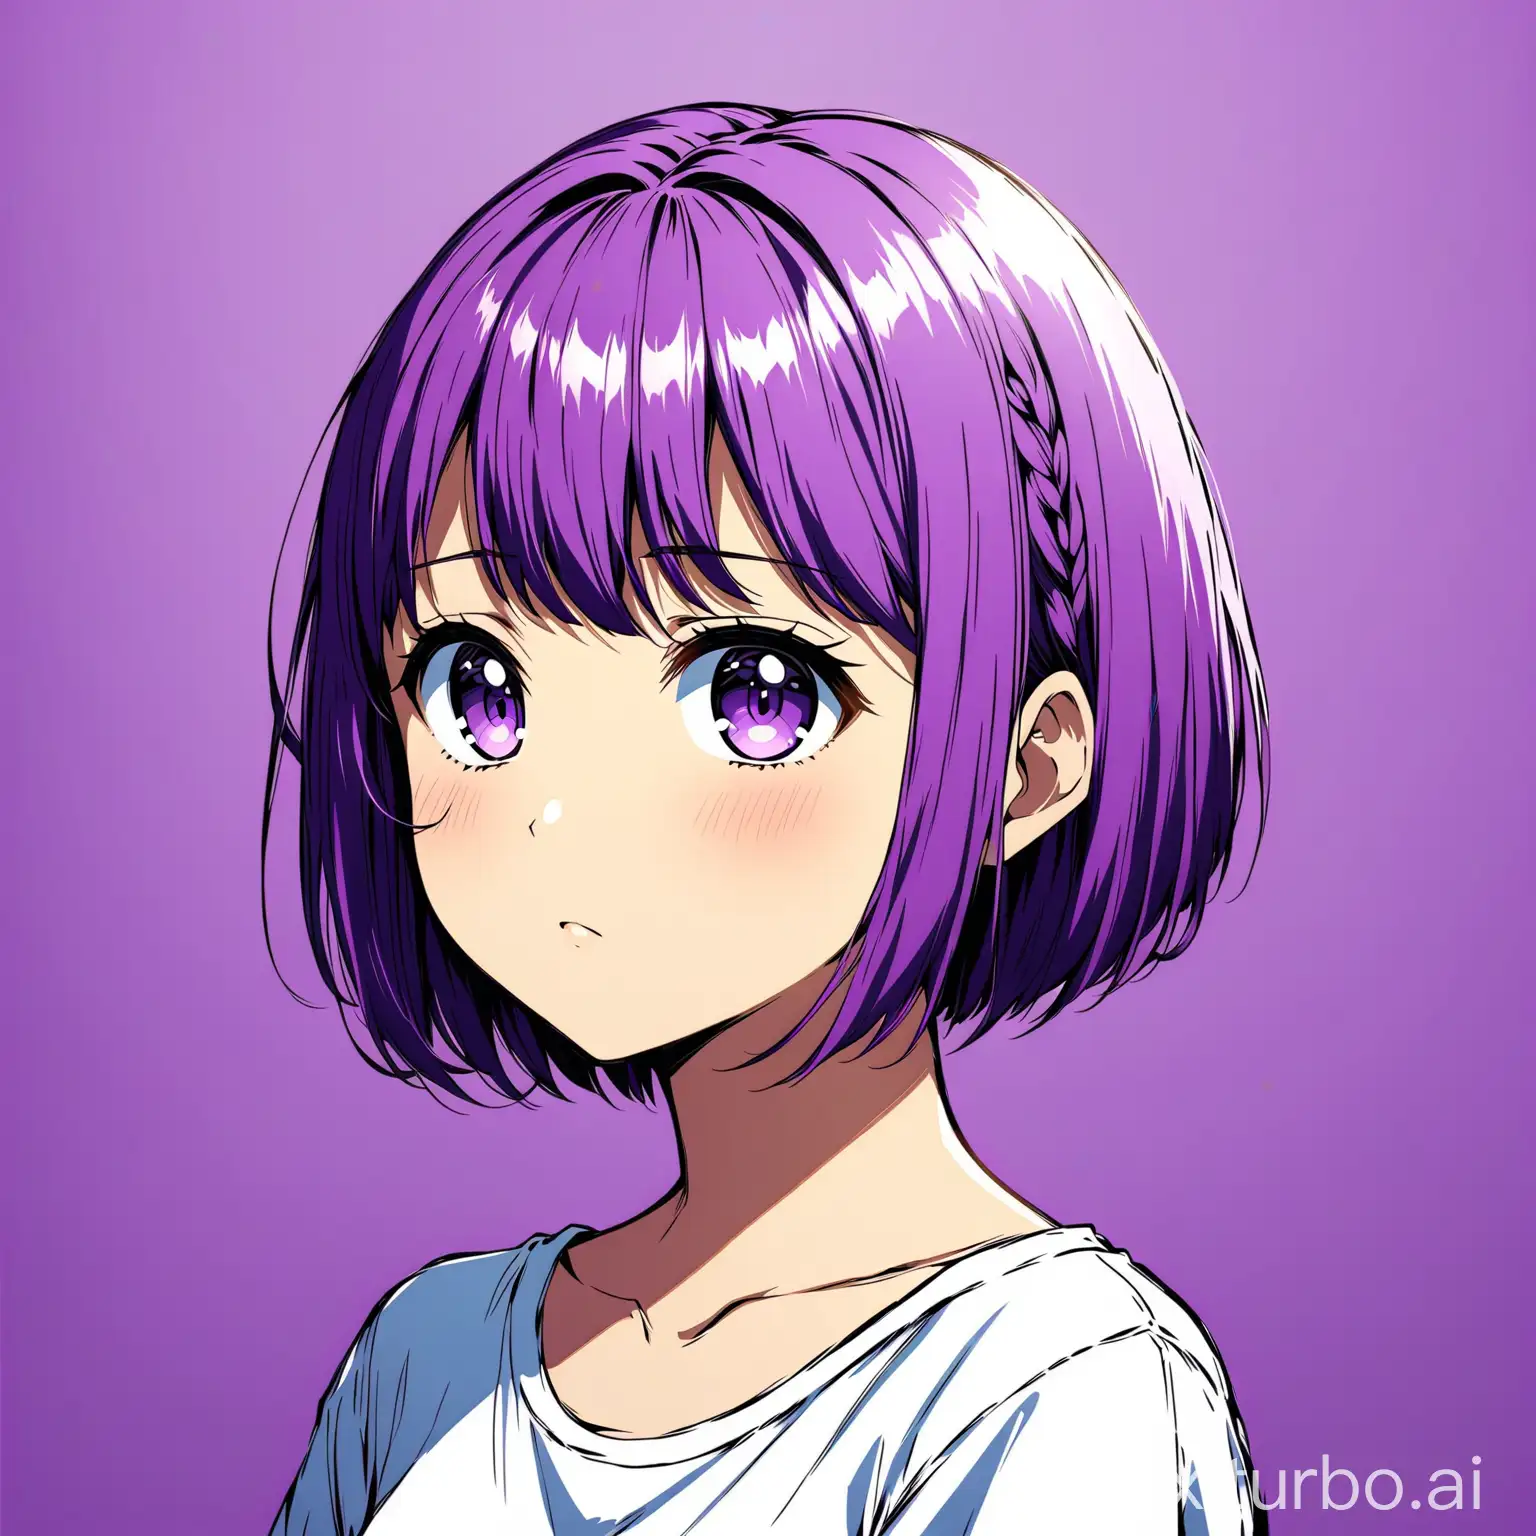 Lonely-Anime-Girl-with-Pixie-Haircut-on-a-Purple-Background